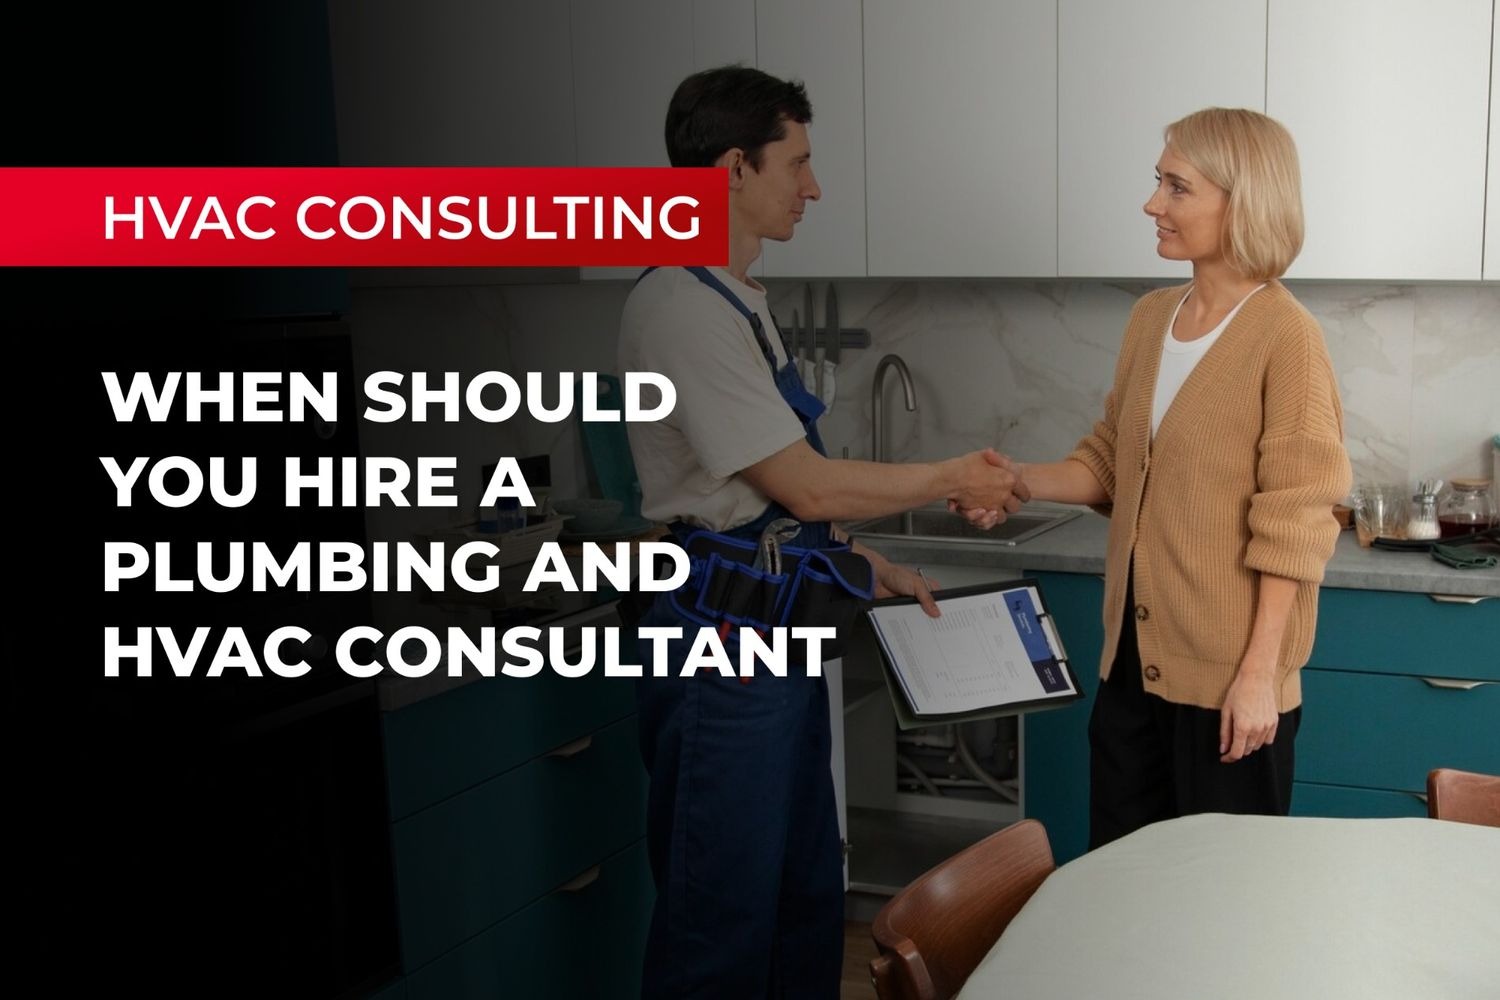 When Should You Hire a Plumbing and HVAC Consultant?